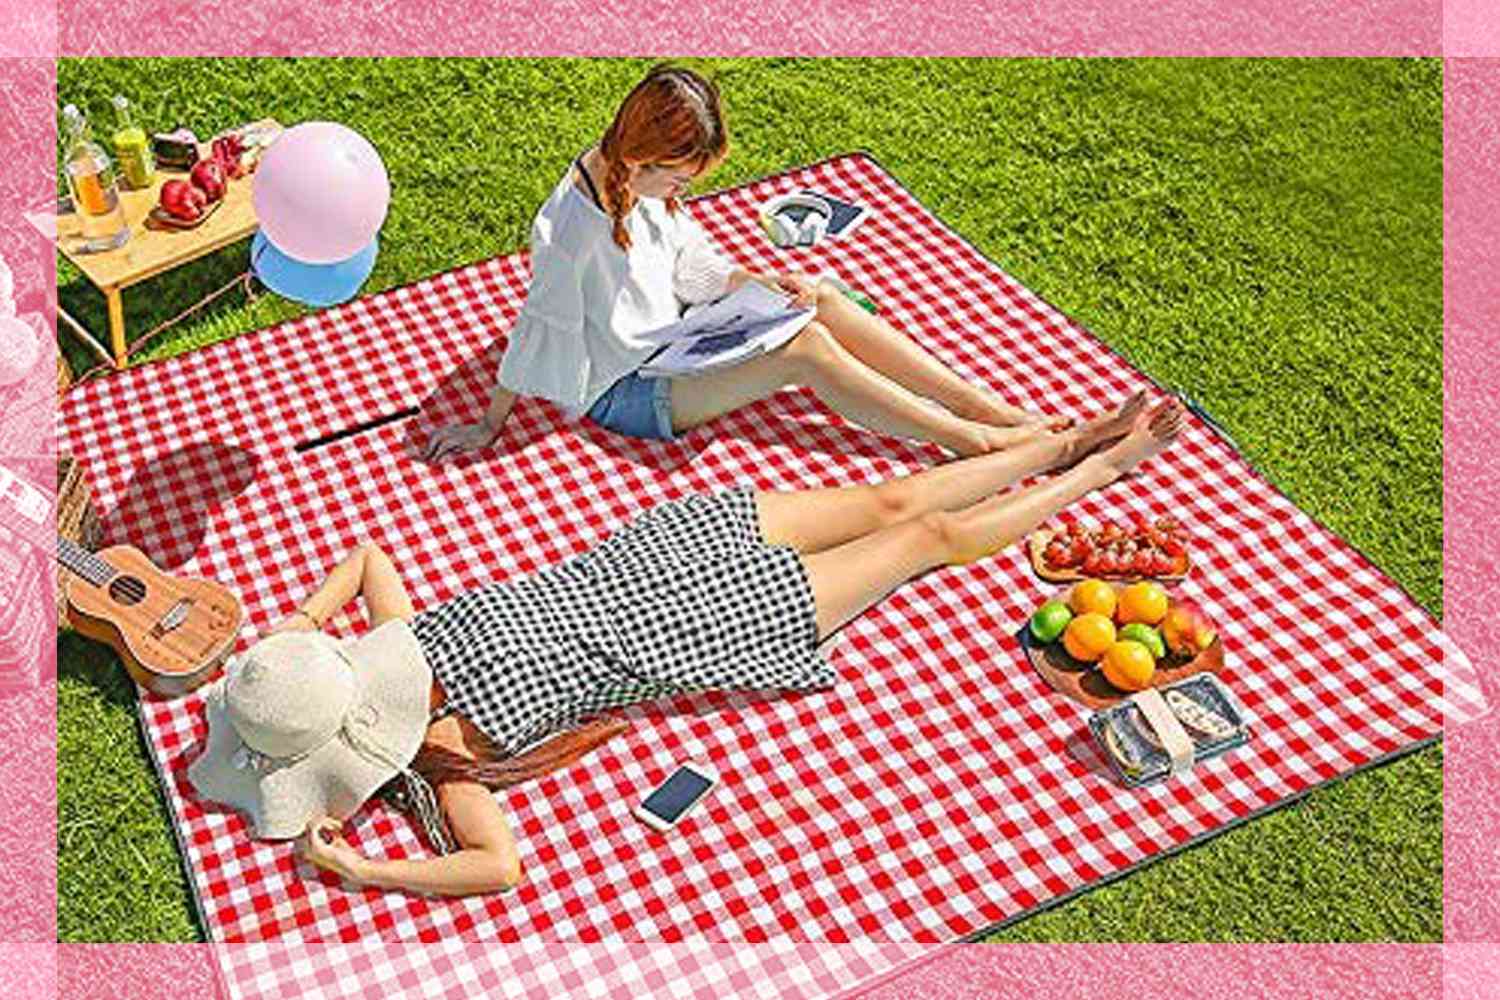 Choose Color Oversized Outdoor Picnic Beach Blanket Details about   8 Ft x 8 Ft 